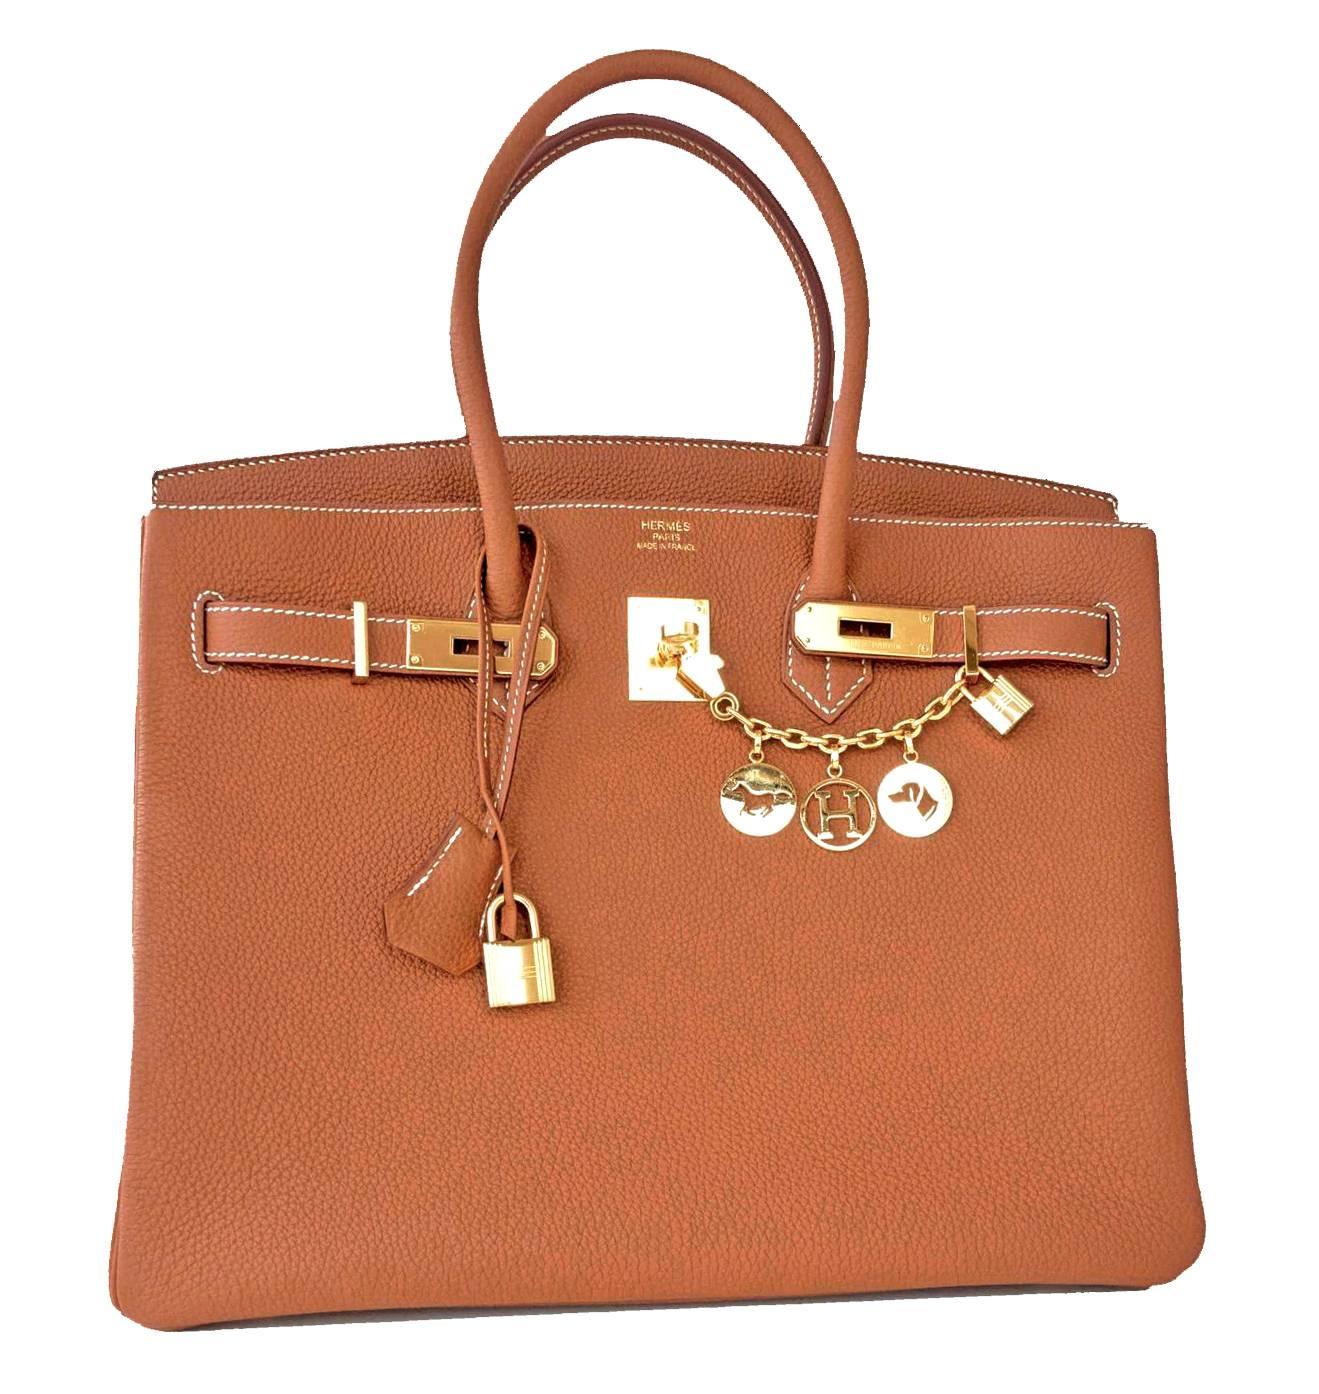 Hermes Gold Camel Tan Togo 35cm Birkin Gold Hardware Iconic Elegant Classic
Brand New in Box.  Store Fresh.  Pristine Condition (with plastic on hardware). 
Just purchased from Hermes store; bag bears new interior X Stamp.
Perfect gift!  Comes